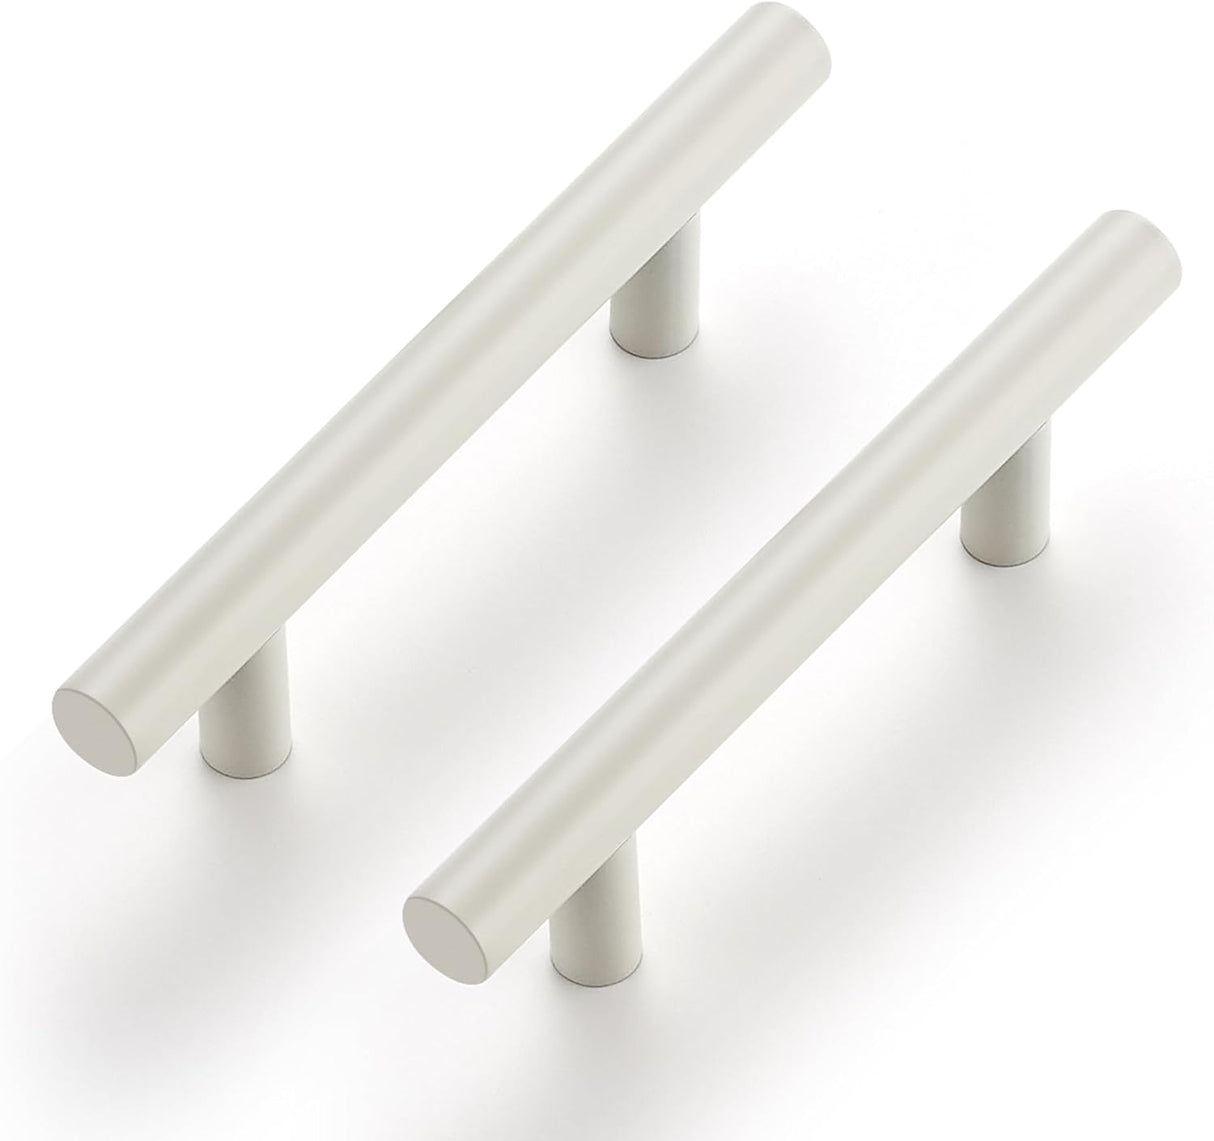 SABER SELECT 5 in. Length with 3 in. Center Cabinet Pulls (5-Pack, White)